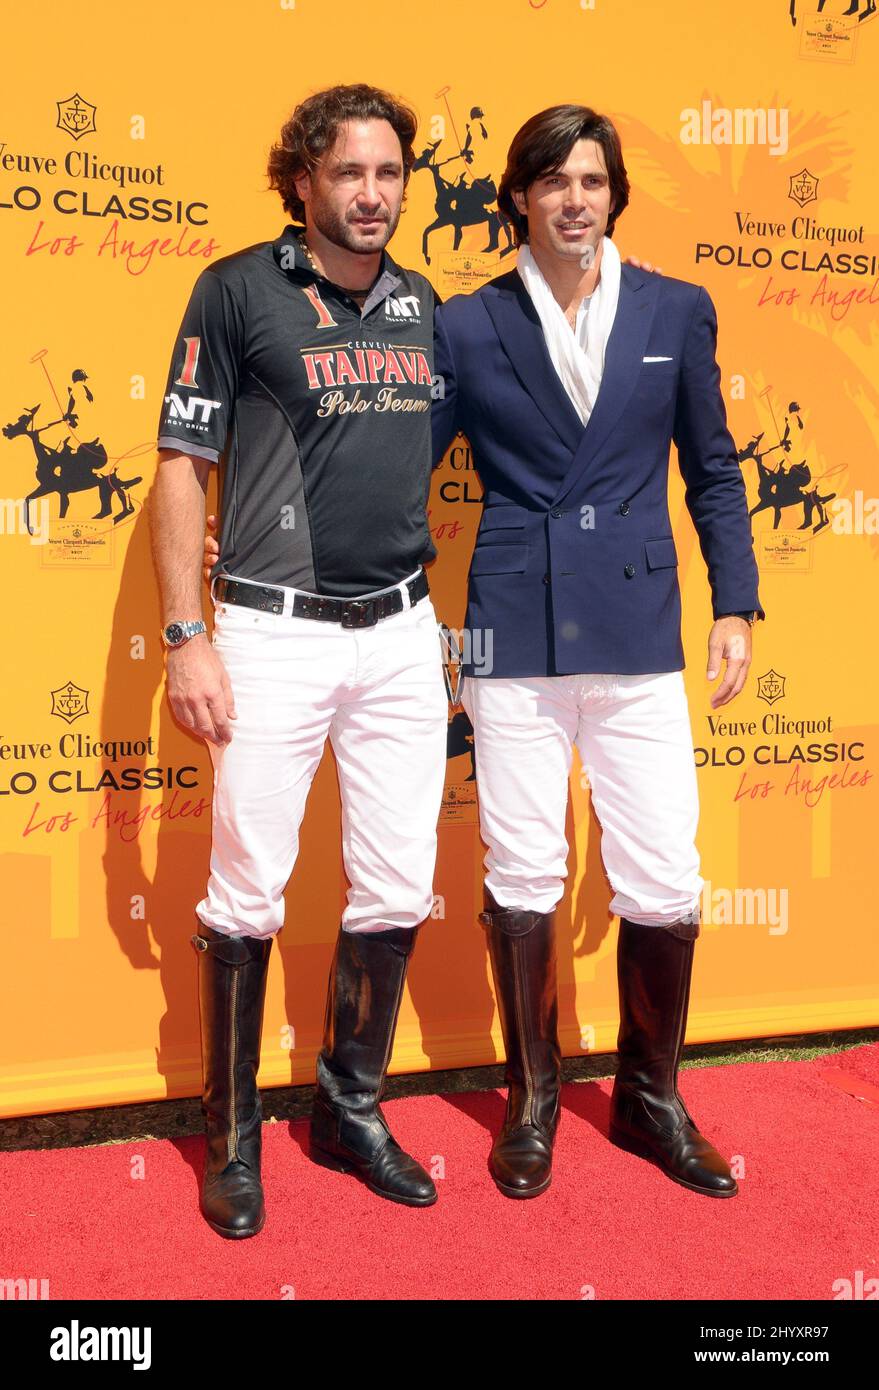 Rico Mansur and Nacho Figueras at The Veuve Clicquot Polo Classic held at Will Rogers State Historic Park in Los Angeles, USA. Stock Photo